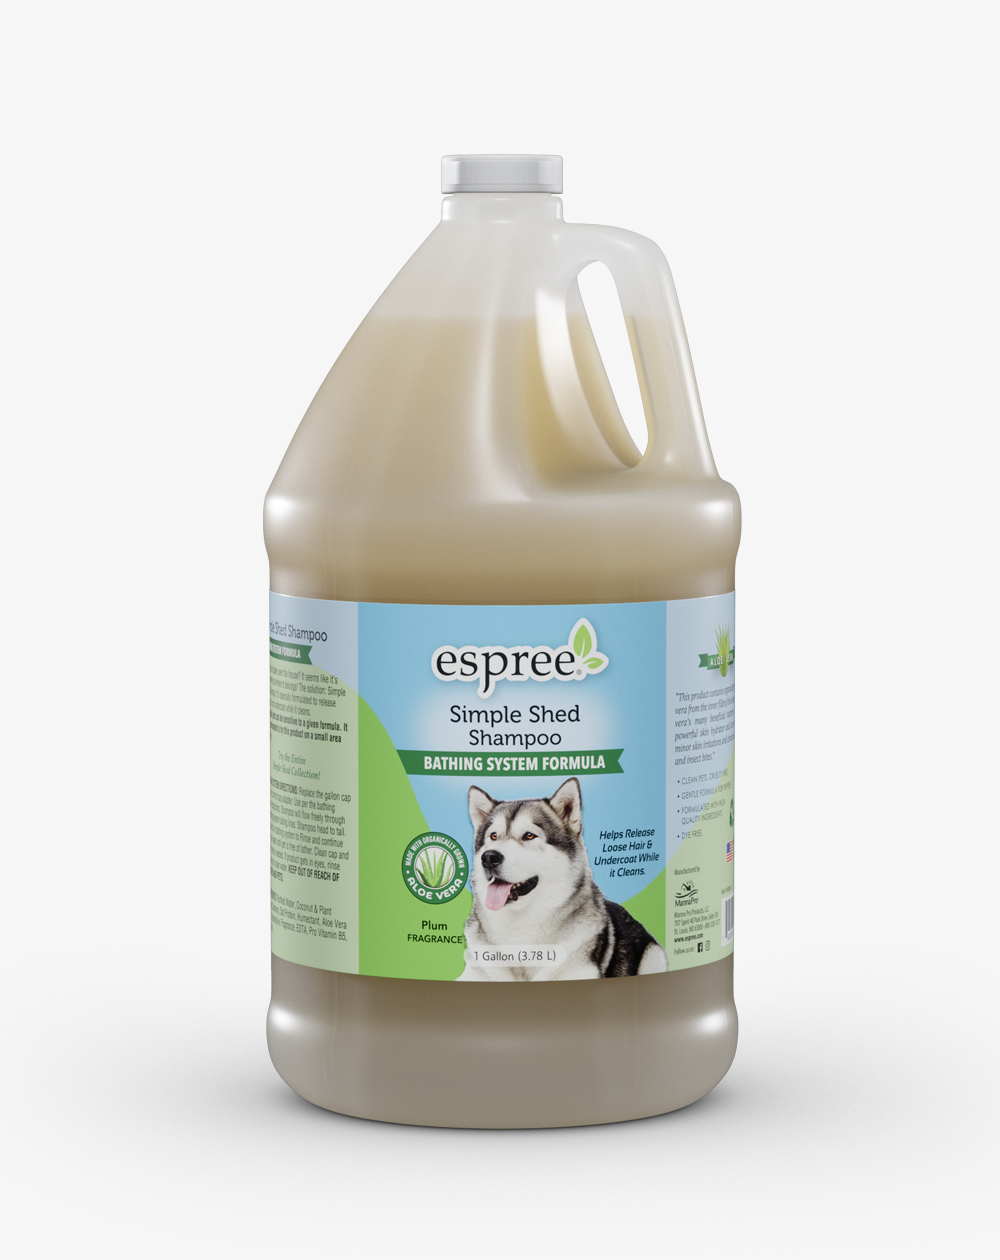 Espree Simple Shed Shampoo for Bathing Systems